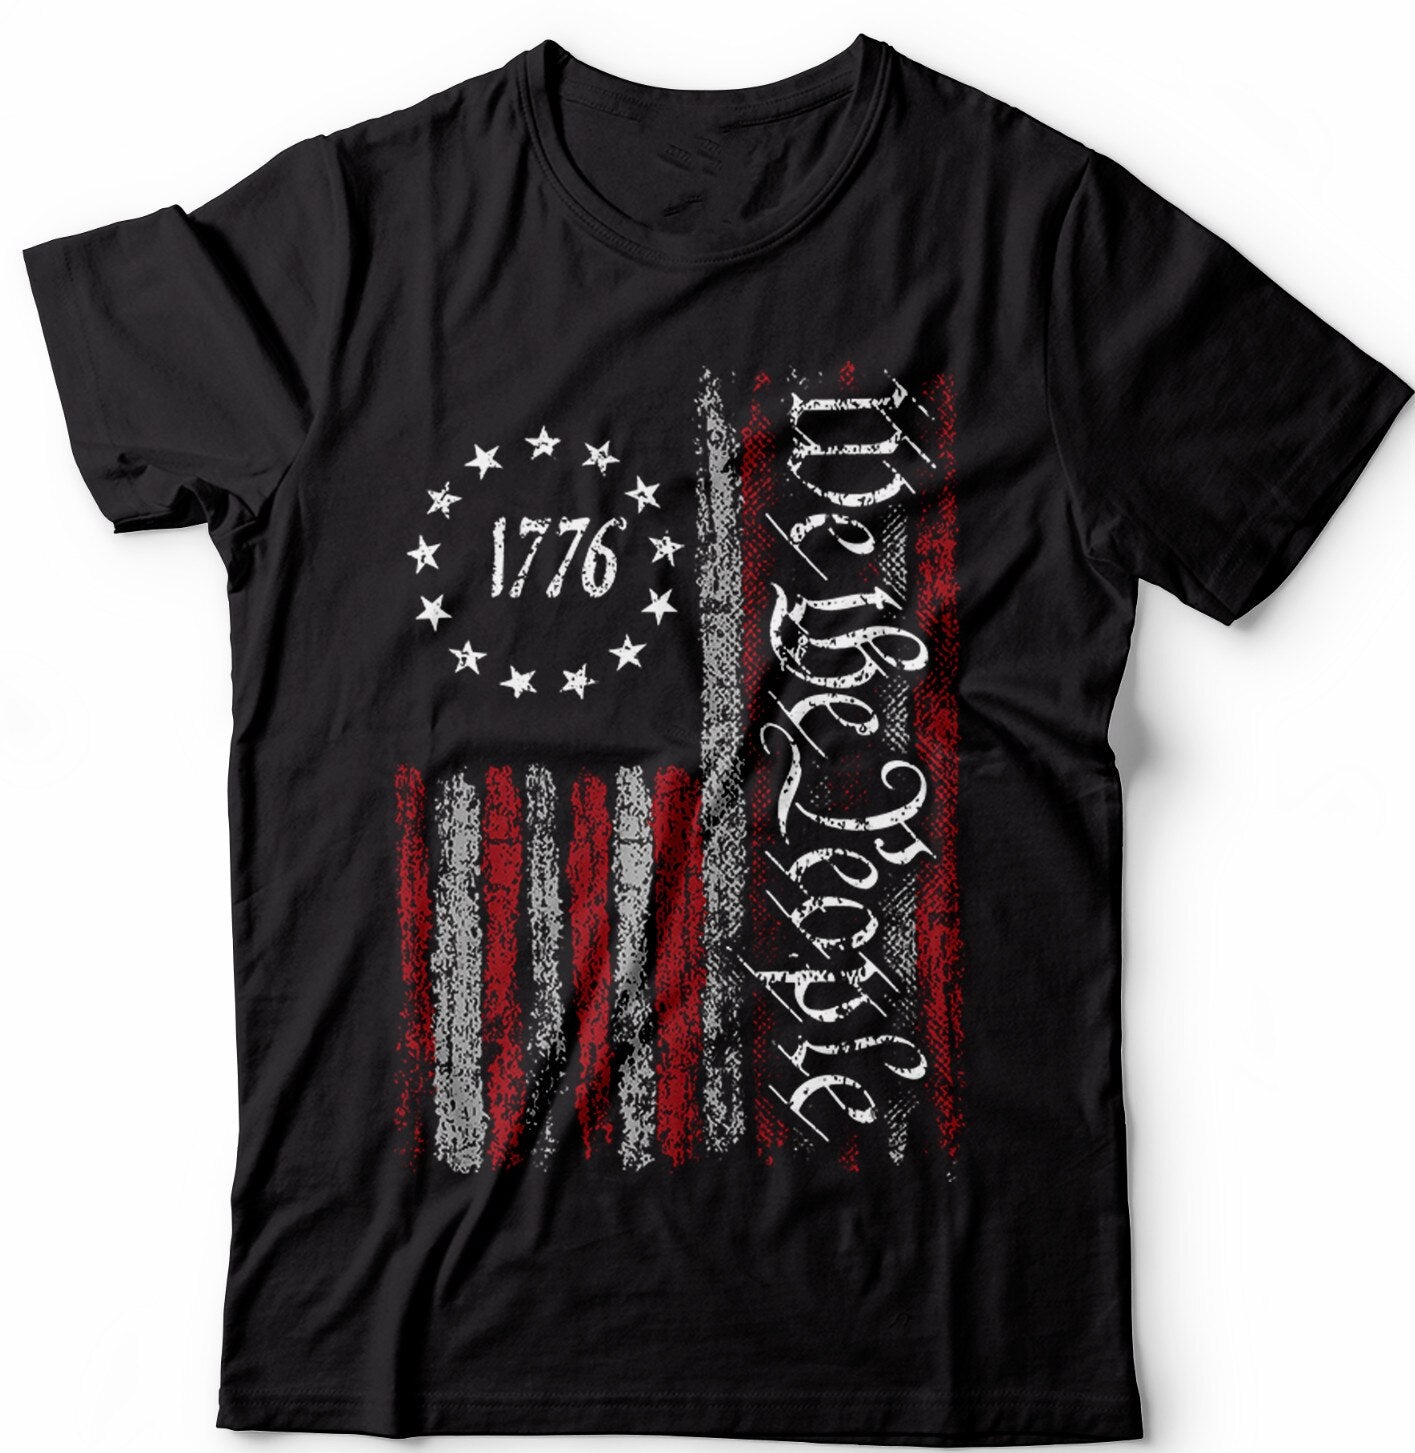 We The People. Vintage 1776 USA Flag Patriotic T Shirt. Short Sleeve 100% Cotton Casual T-shirts Loose Top Size S-3XL